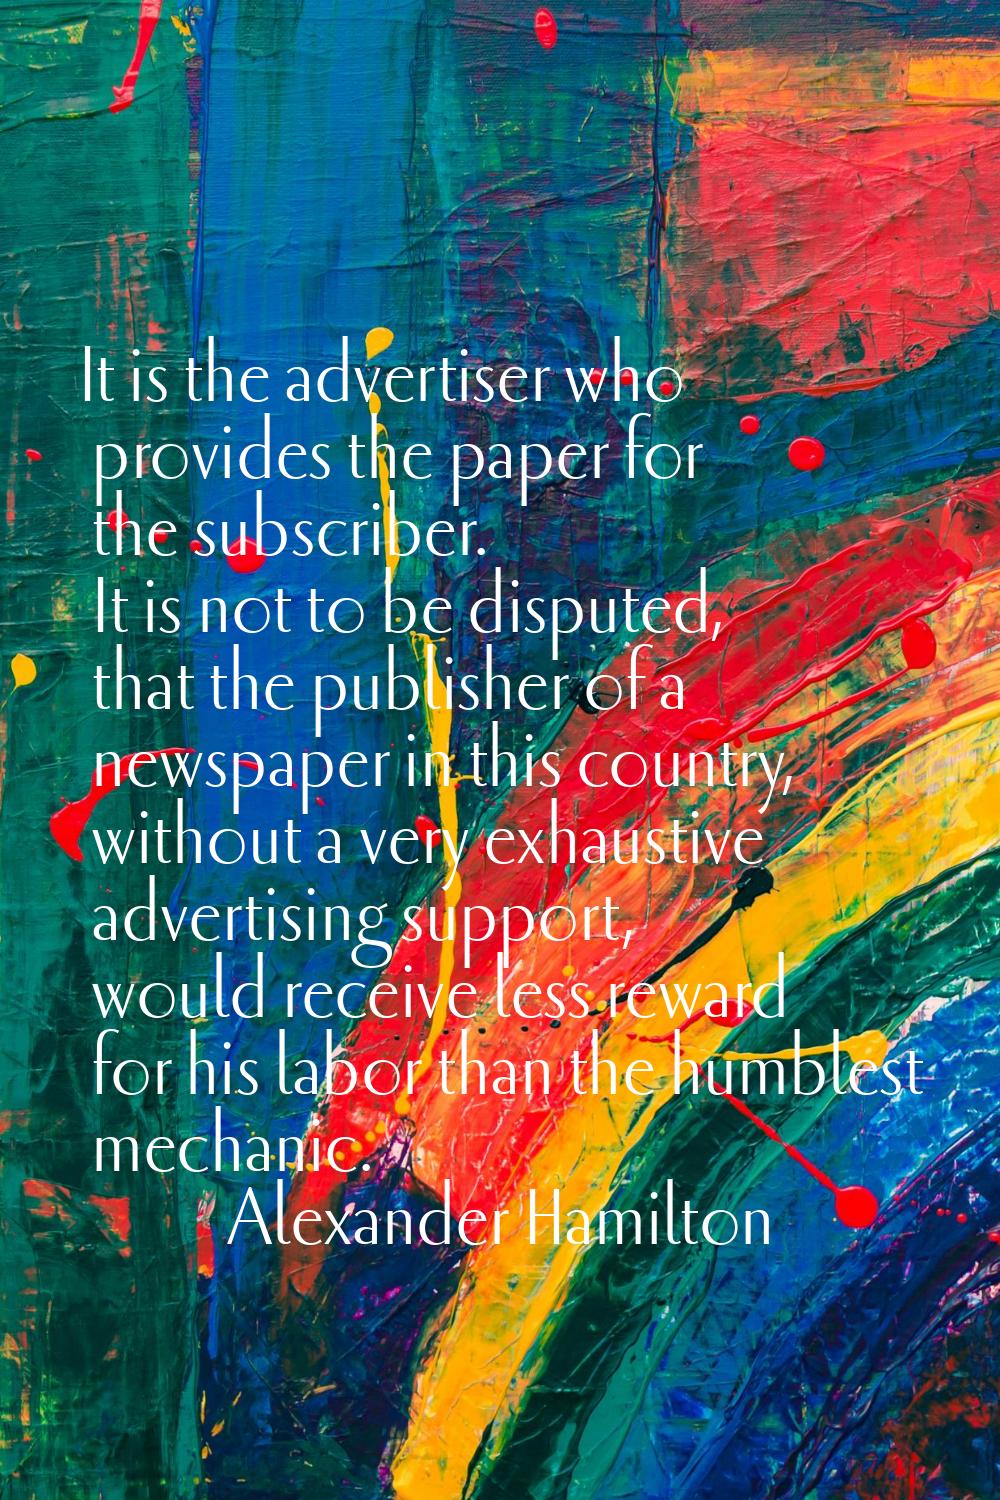 It is the advertiser who provides the paper for the subscriber. It is not to be disputed, that the 